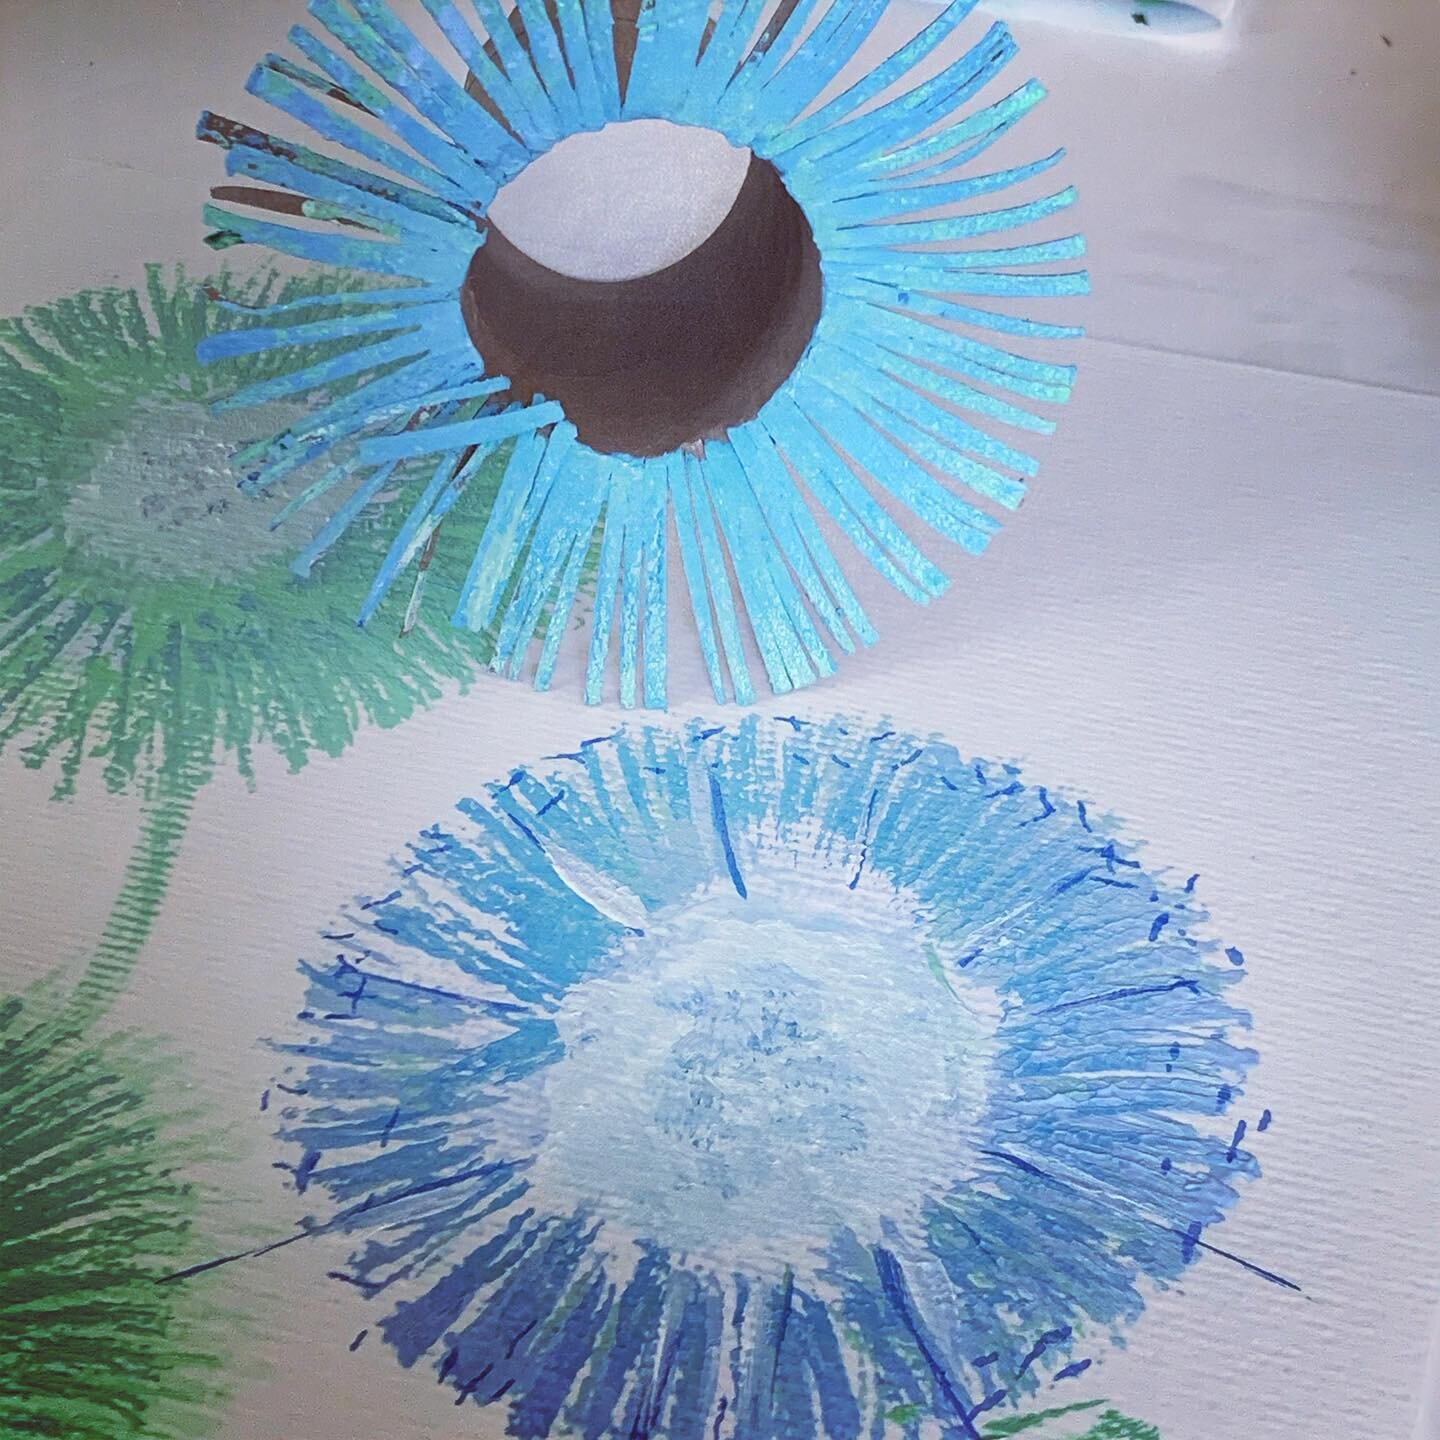 Using random things to apply texture for kid&rsquo;s painting class. Today is all about empty toilet paper rolls and dandelions. #texture #acrylicpainting #learning #experiments